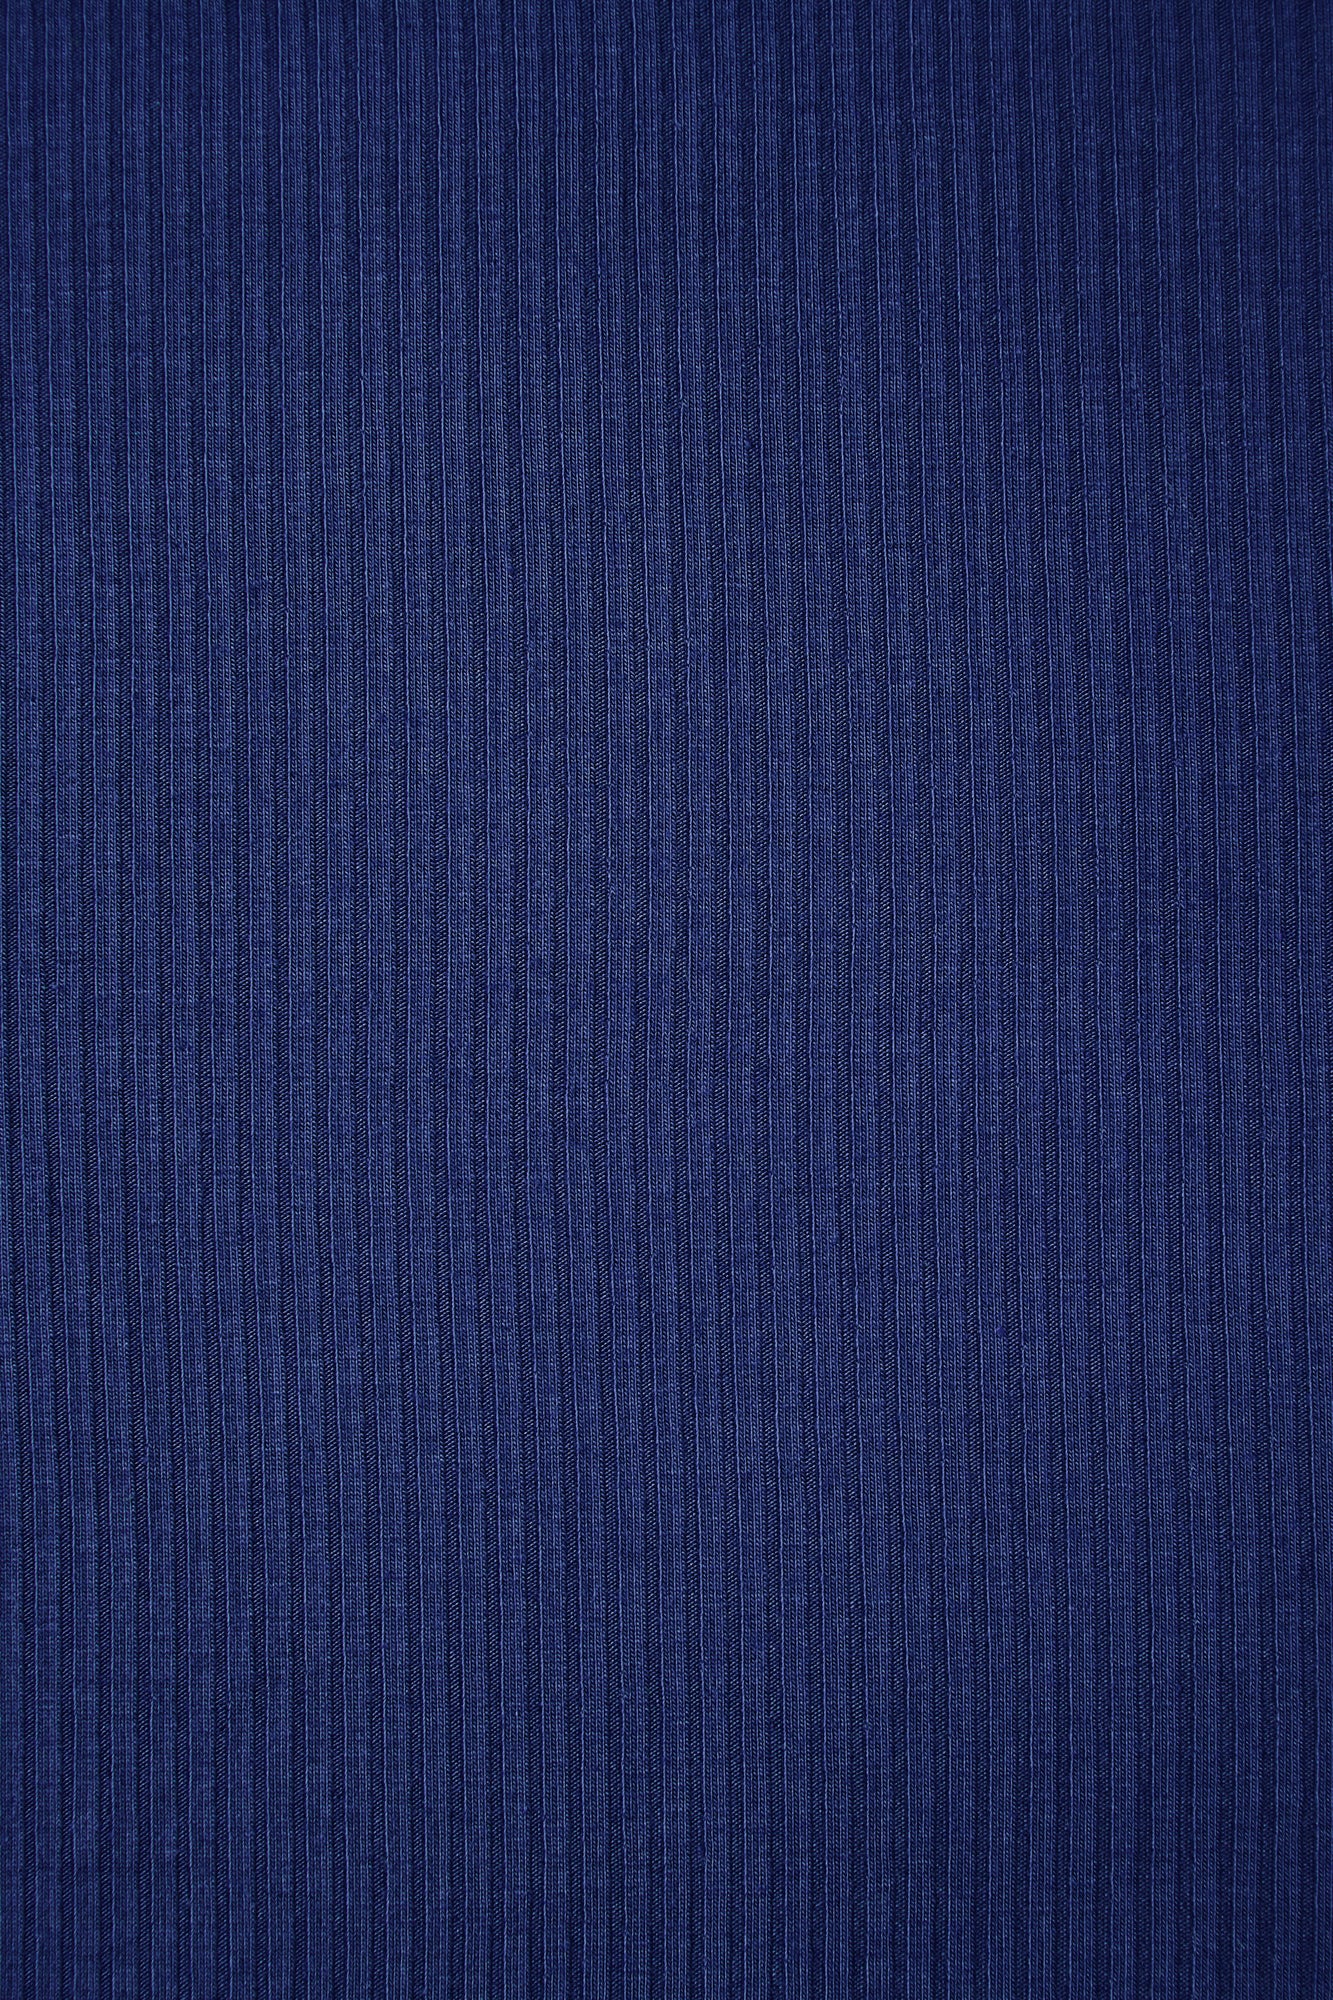 REMNANT 0.21 metre - Derby Ribbed Jersey Lapis with TENCEL™ Modal